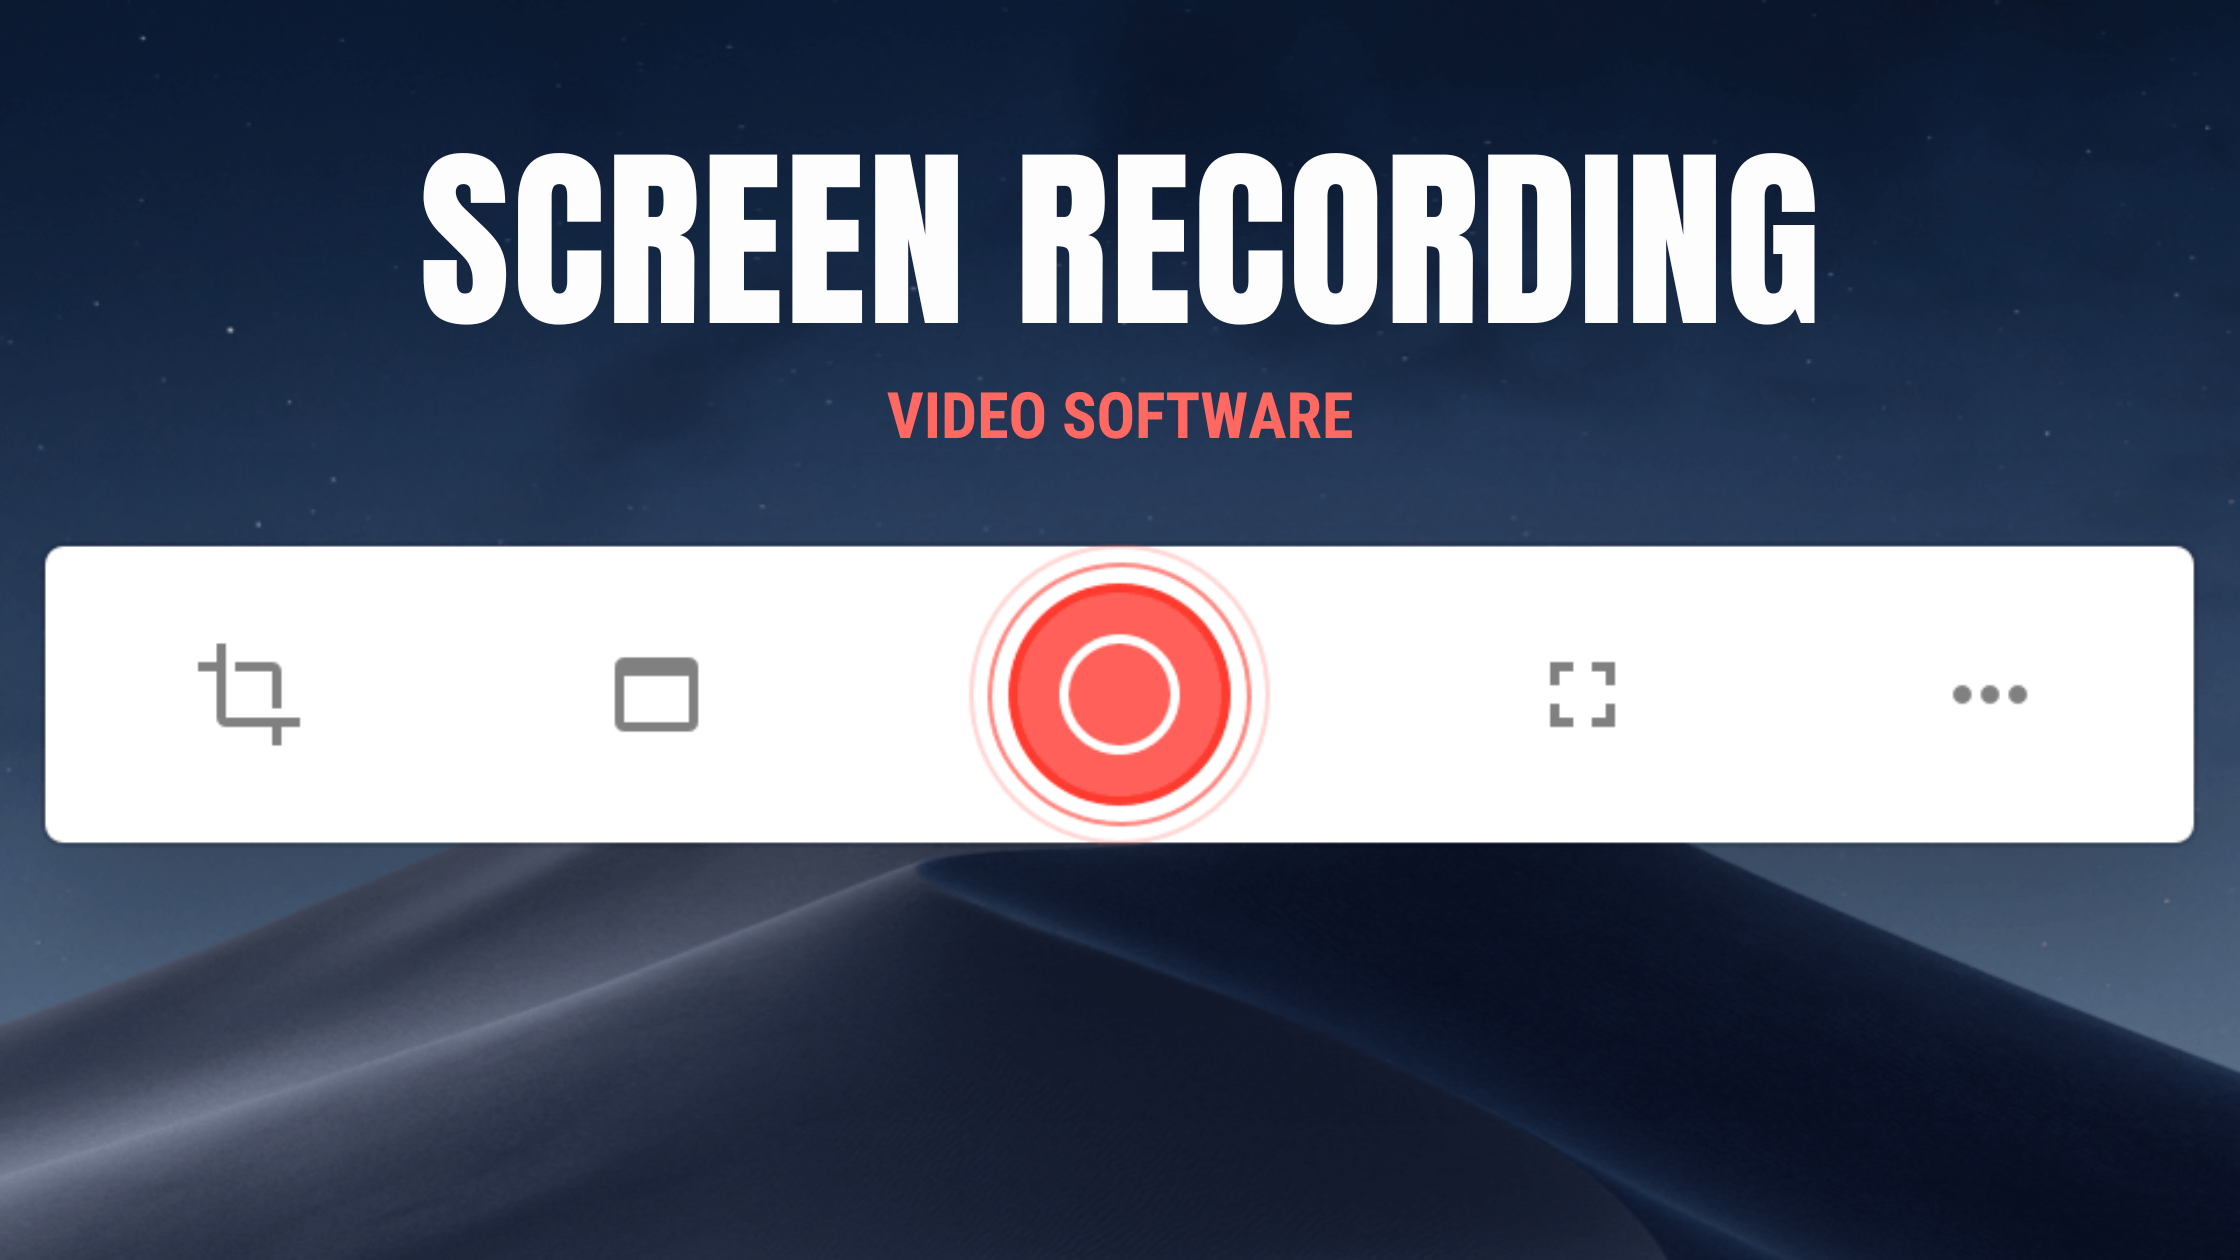 What Is Screen Recording Software